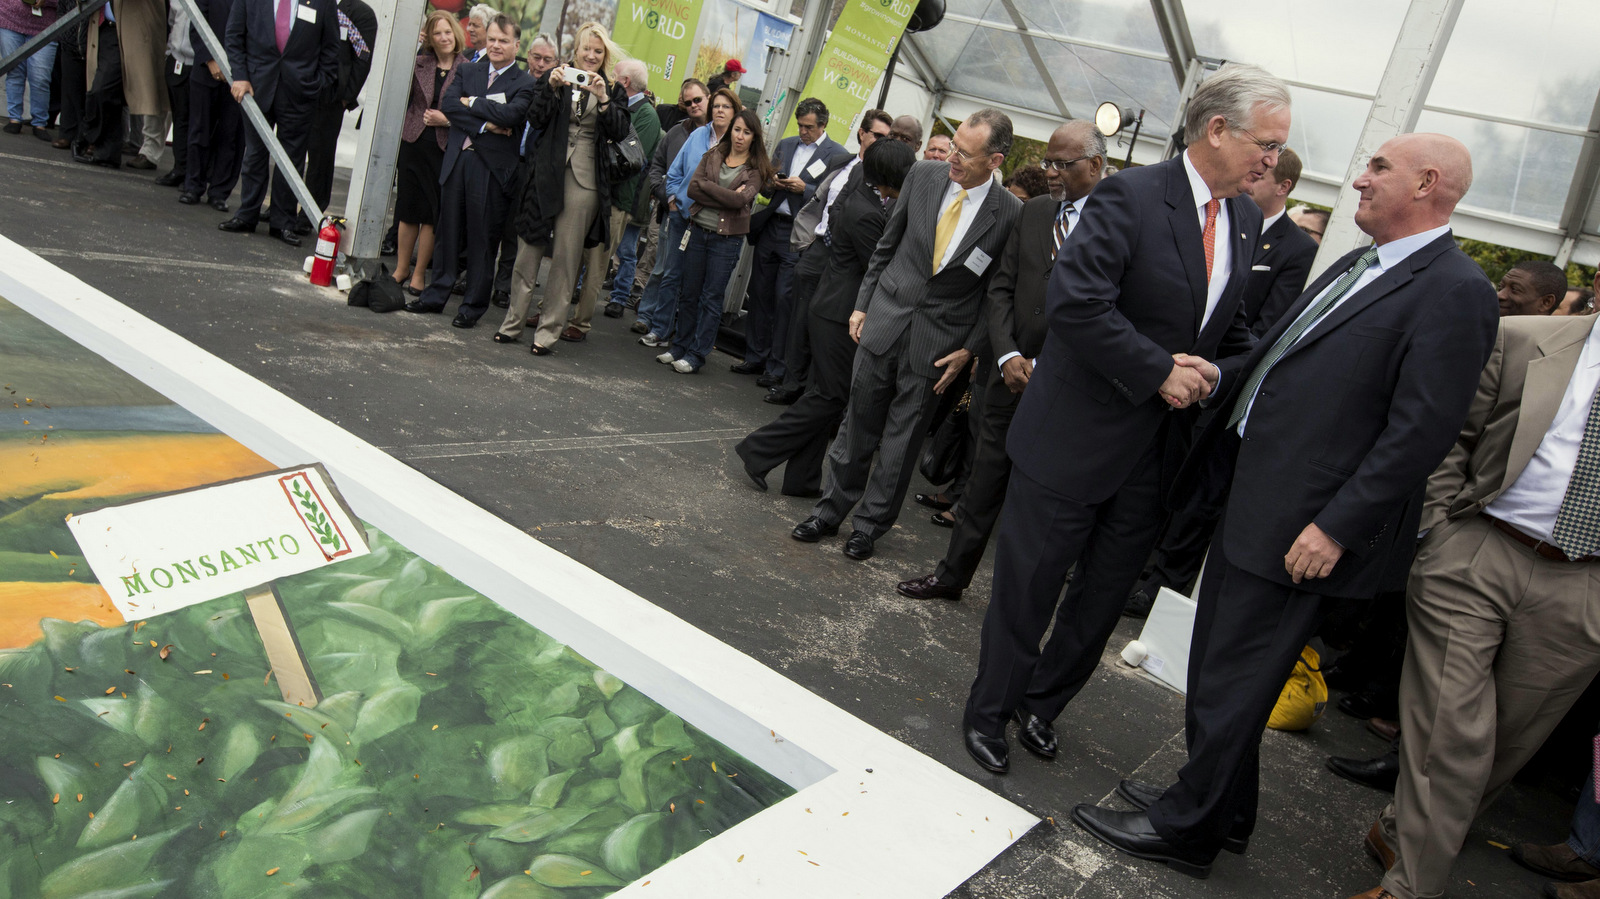 Hugh Grant, right, Monsanto chairman and chief executive officer, speaks with Mo. Gov. Jay Nixon next to a 3D agricultural chalk art piece at Monsanto's Chesterfield Village Research Center expansion groundbreaking on Tuesday, Oct. 22, 2013 in Chesterfield, Mo. The event commemorated the $400 million expansion which is expected to create 675 new jobs in St. Louis over the next three years. (Whitney Curtis / AP Images for Monsanto Co.)